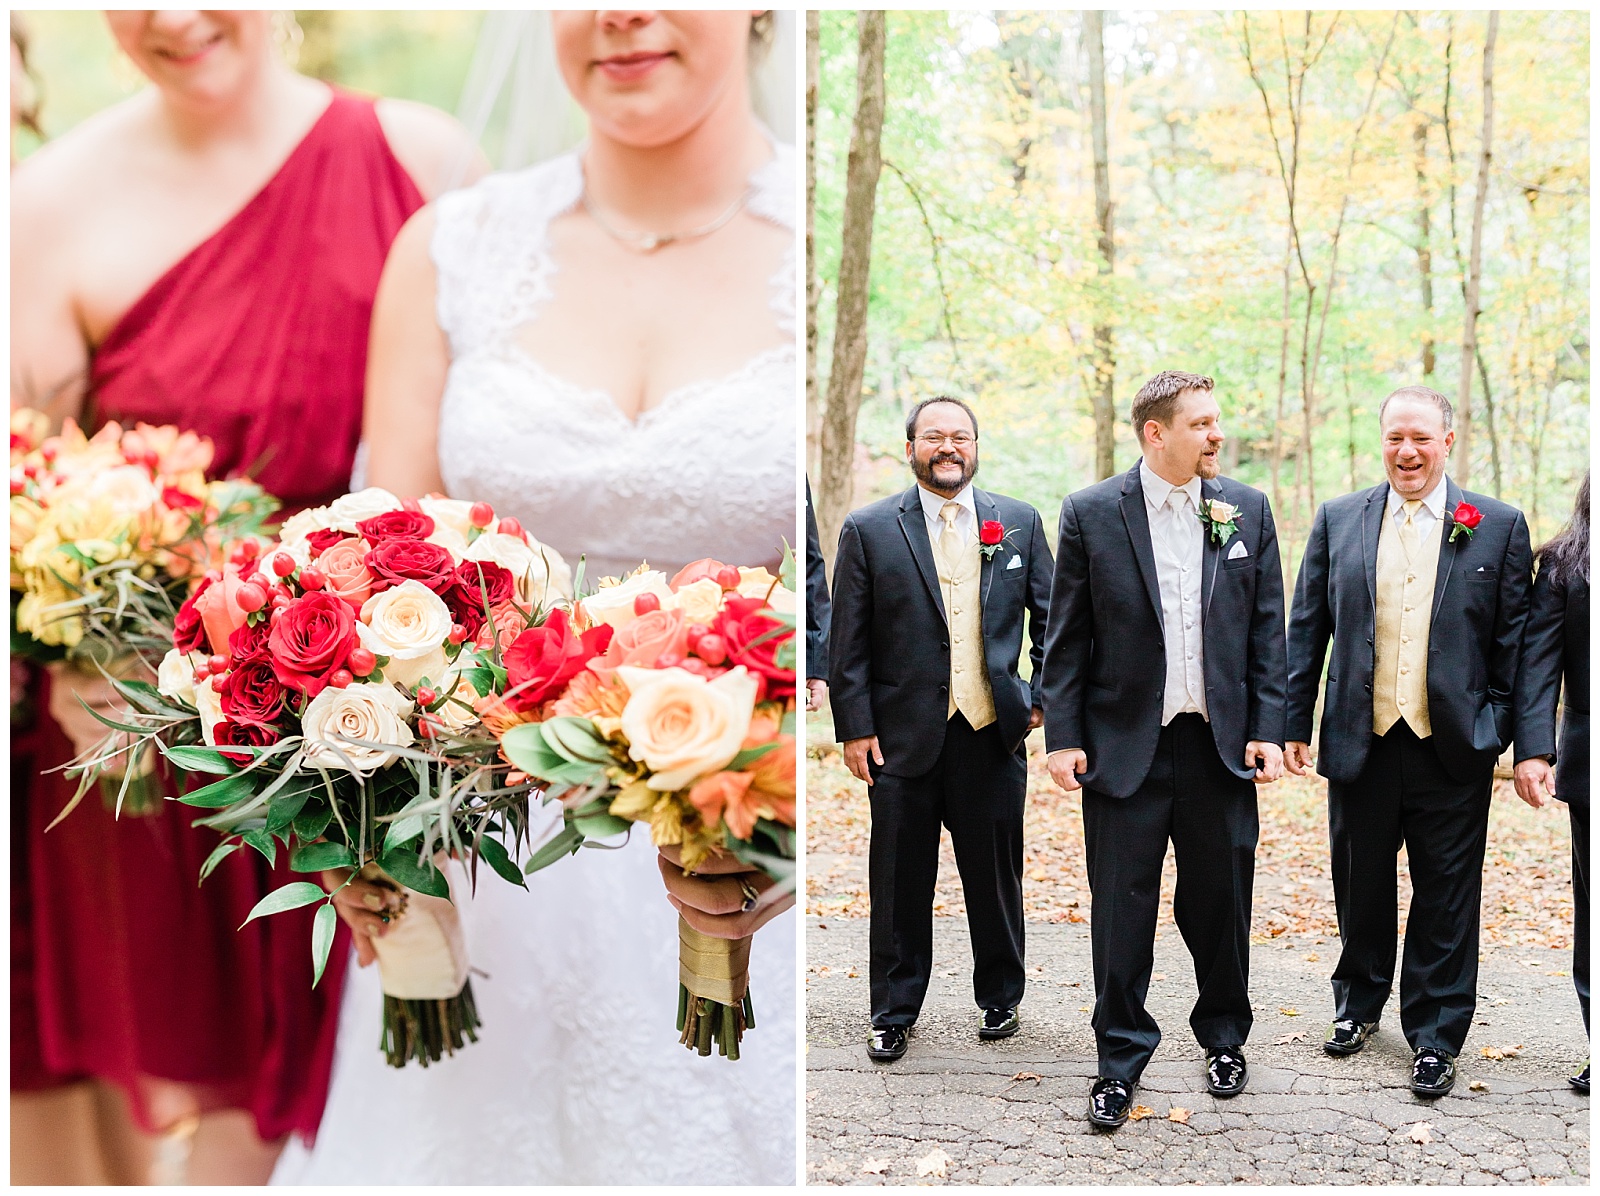 Autumn,Bouquets,David's Country Inn,Fall Wedding,Forest,Hackettstown,NJ Wedding Photographer,Wedding Party,Woods,